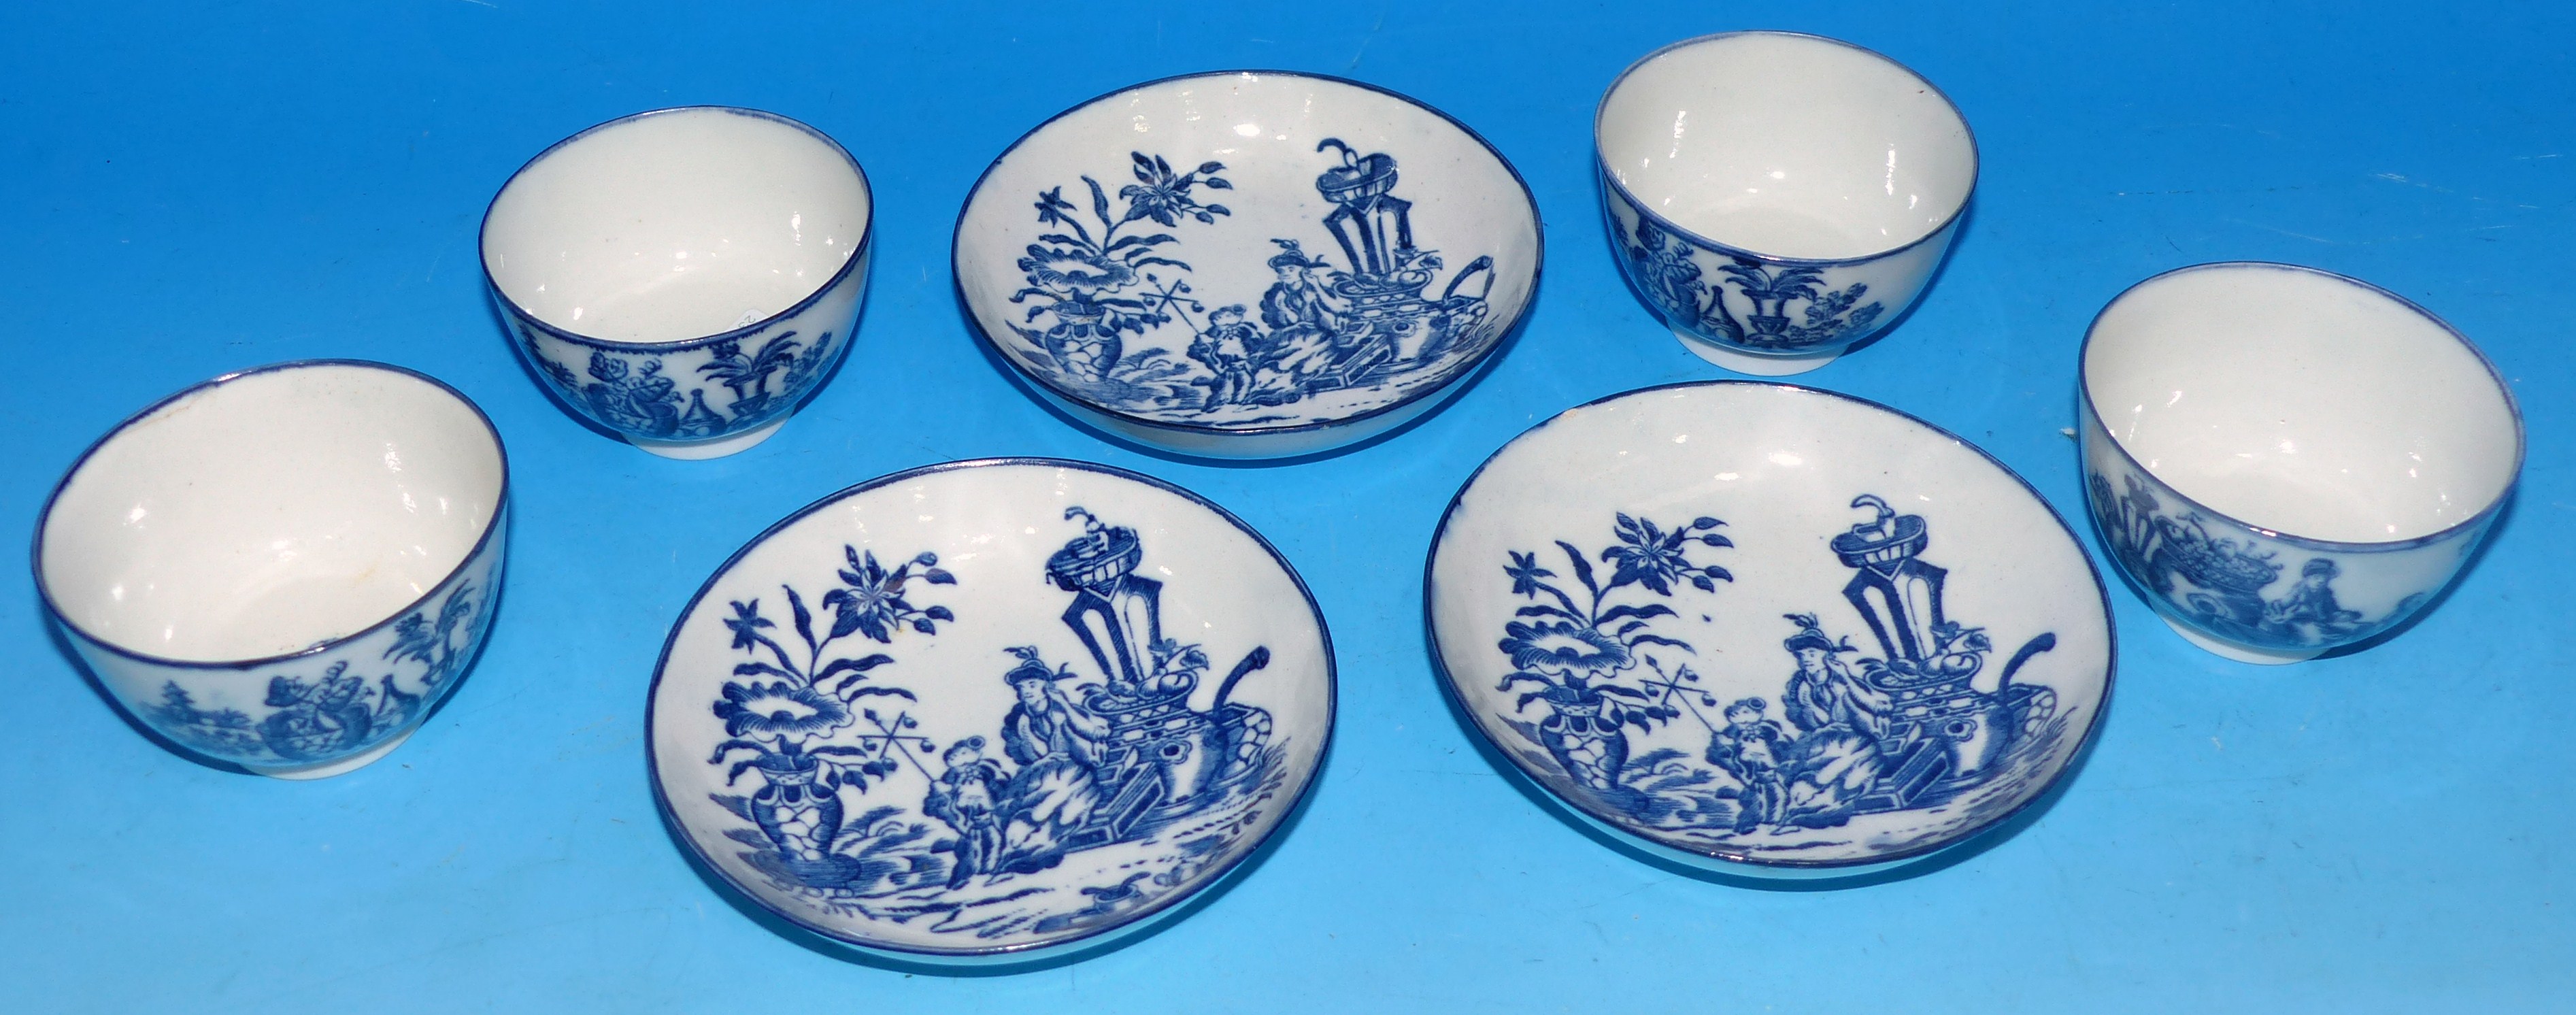 A set of 4 late 18th century English porcelain tea bowls and 3 saucers with blue transfer printed